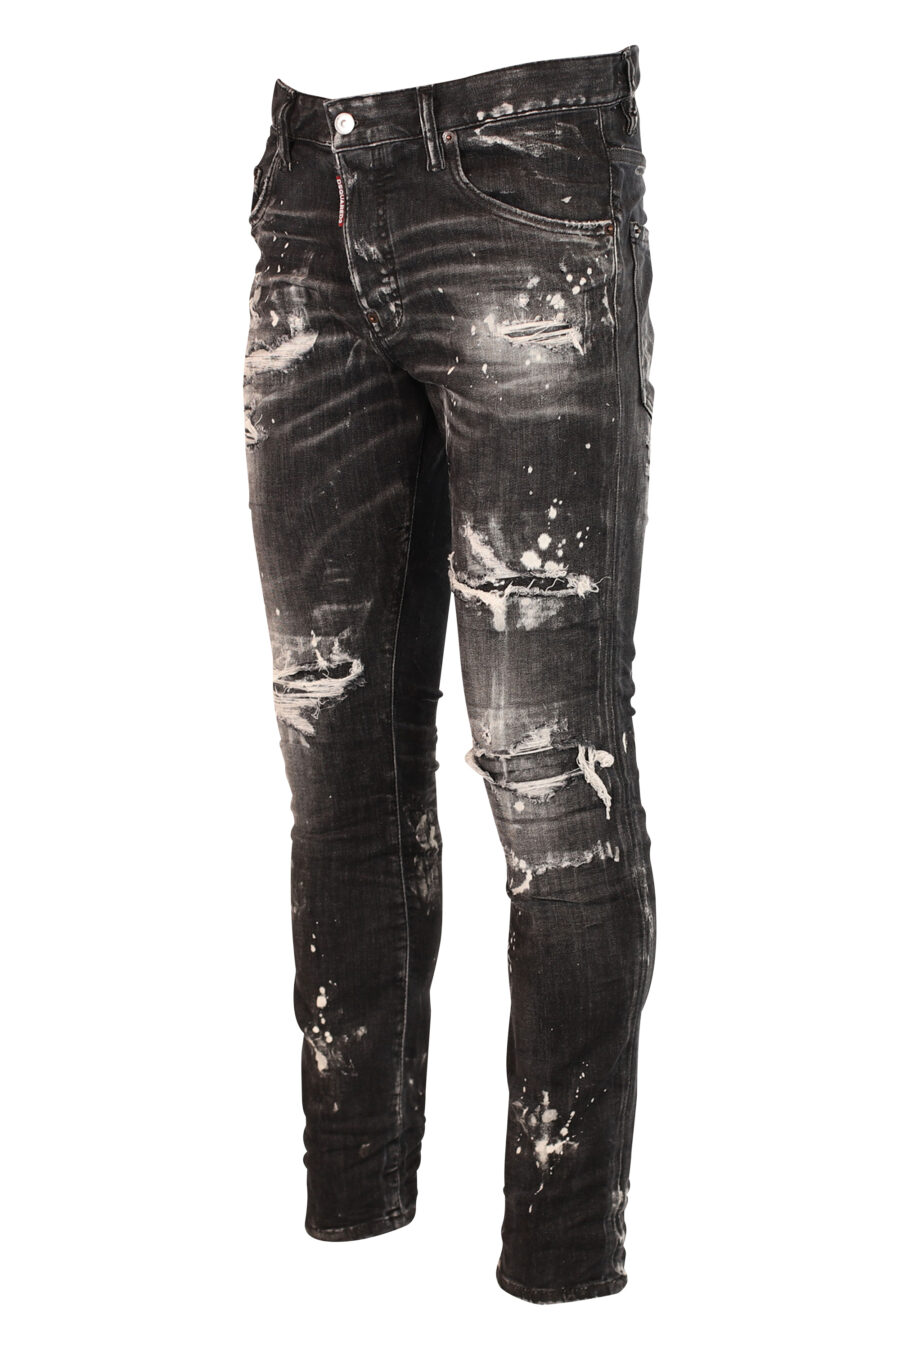 Skater jean trousers black worn out with rips - 8052134938102 2